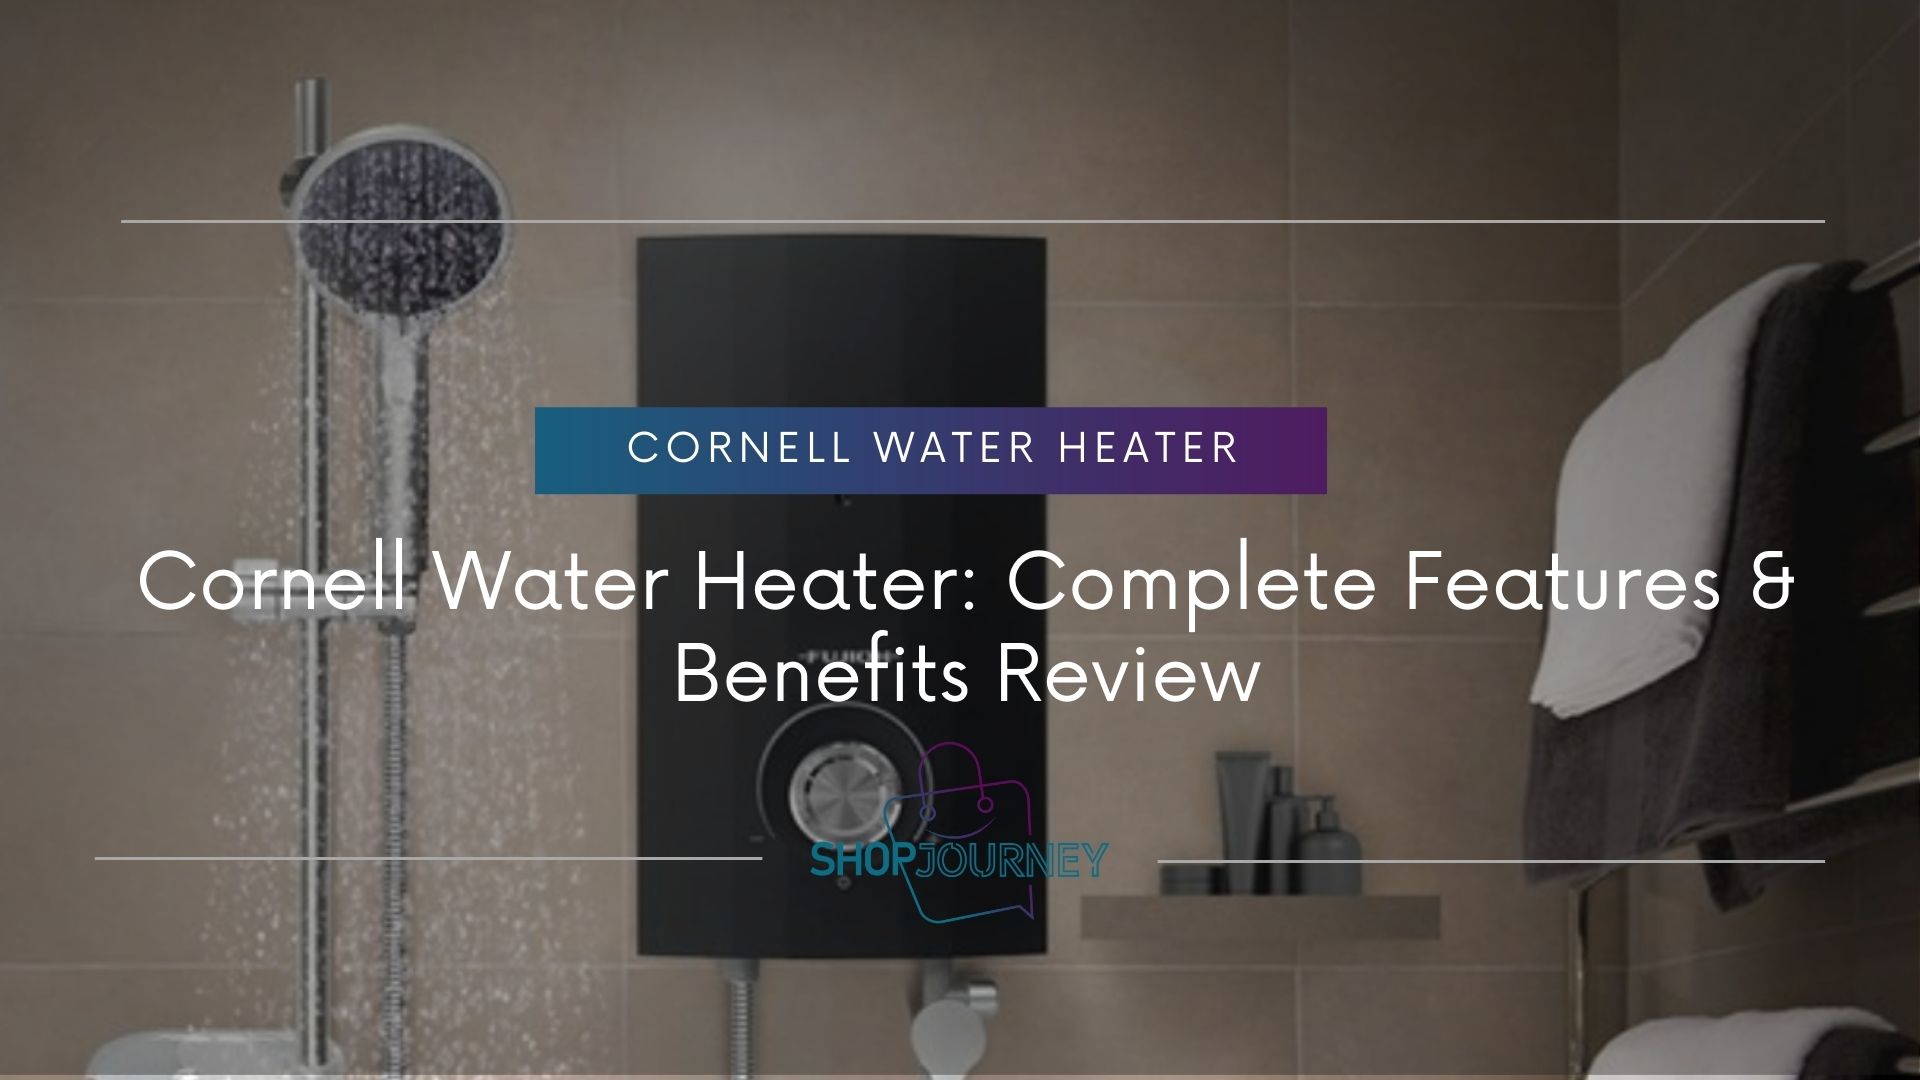 Connell water heater - Shop Journey